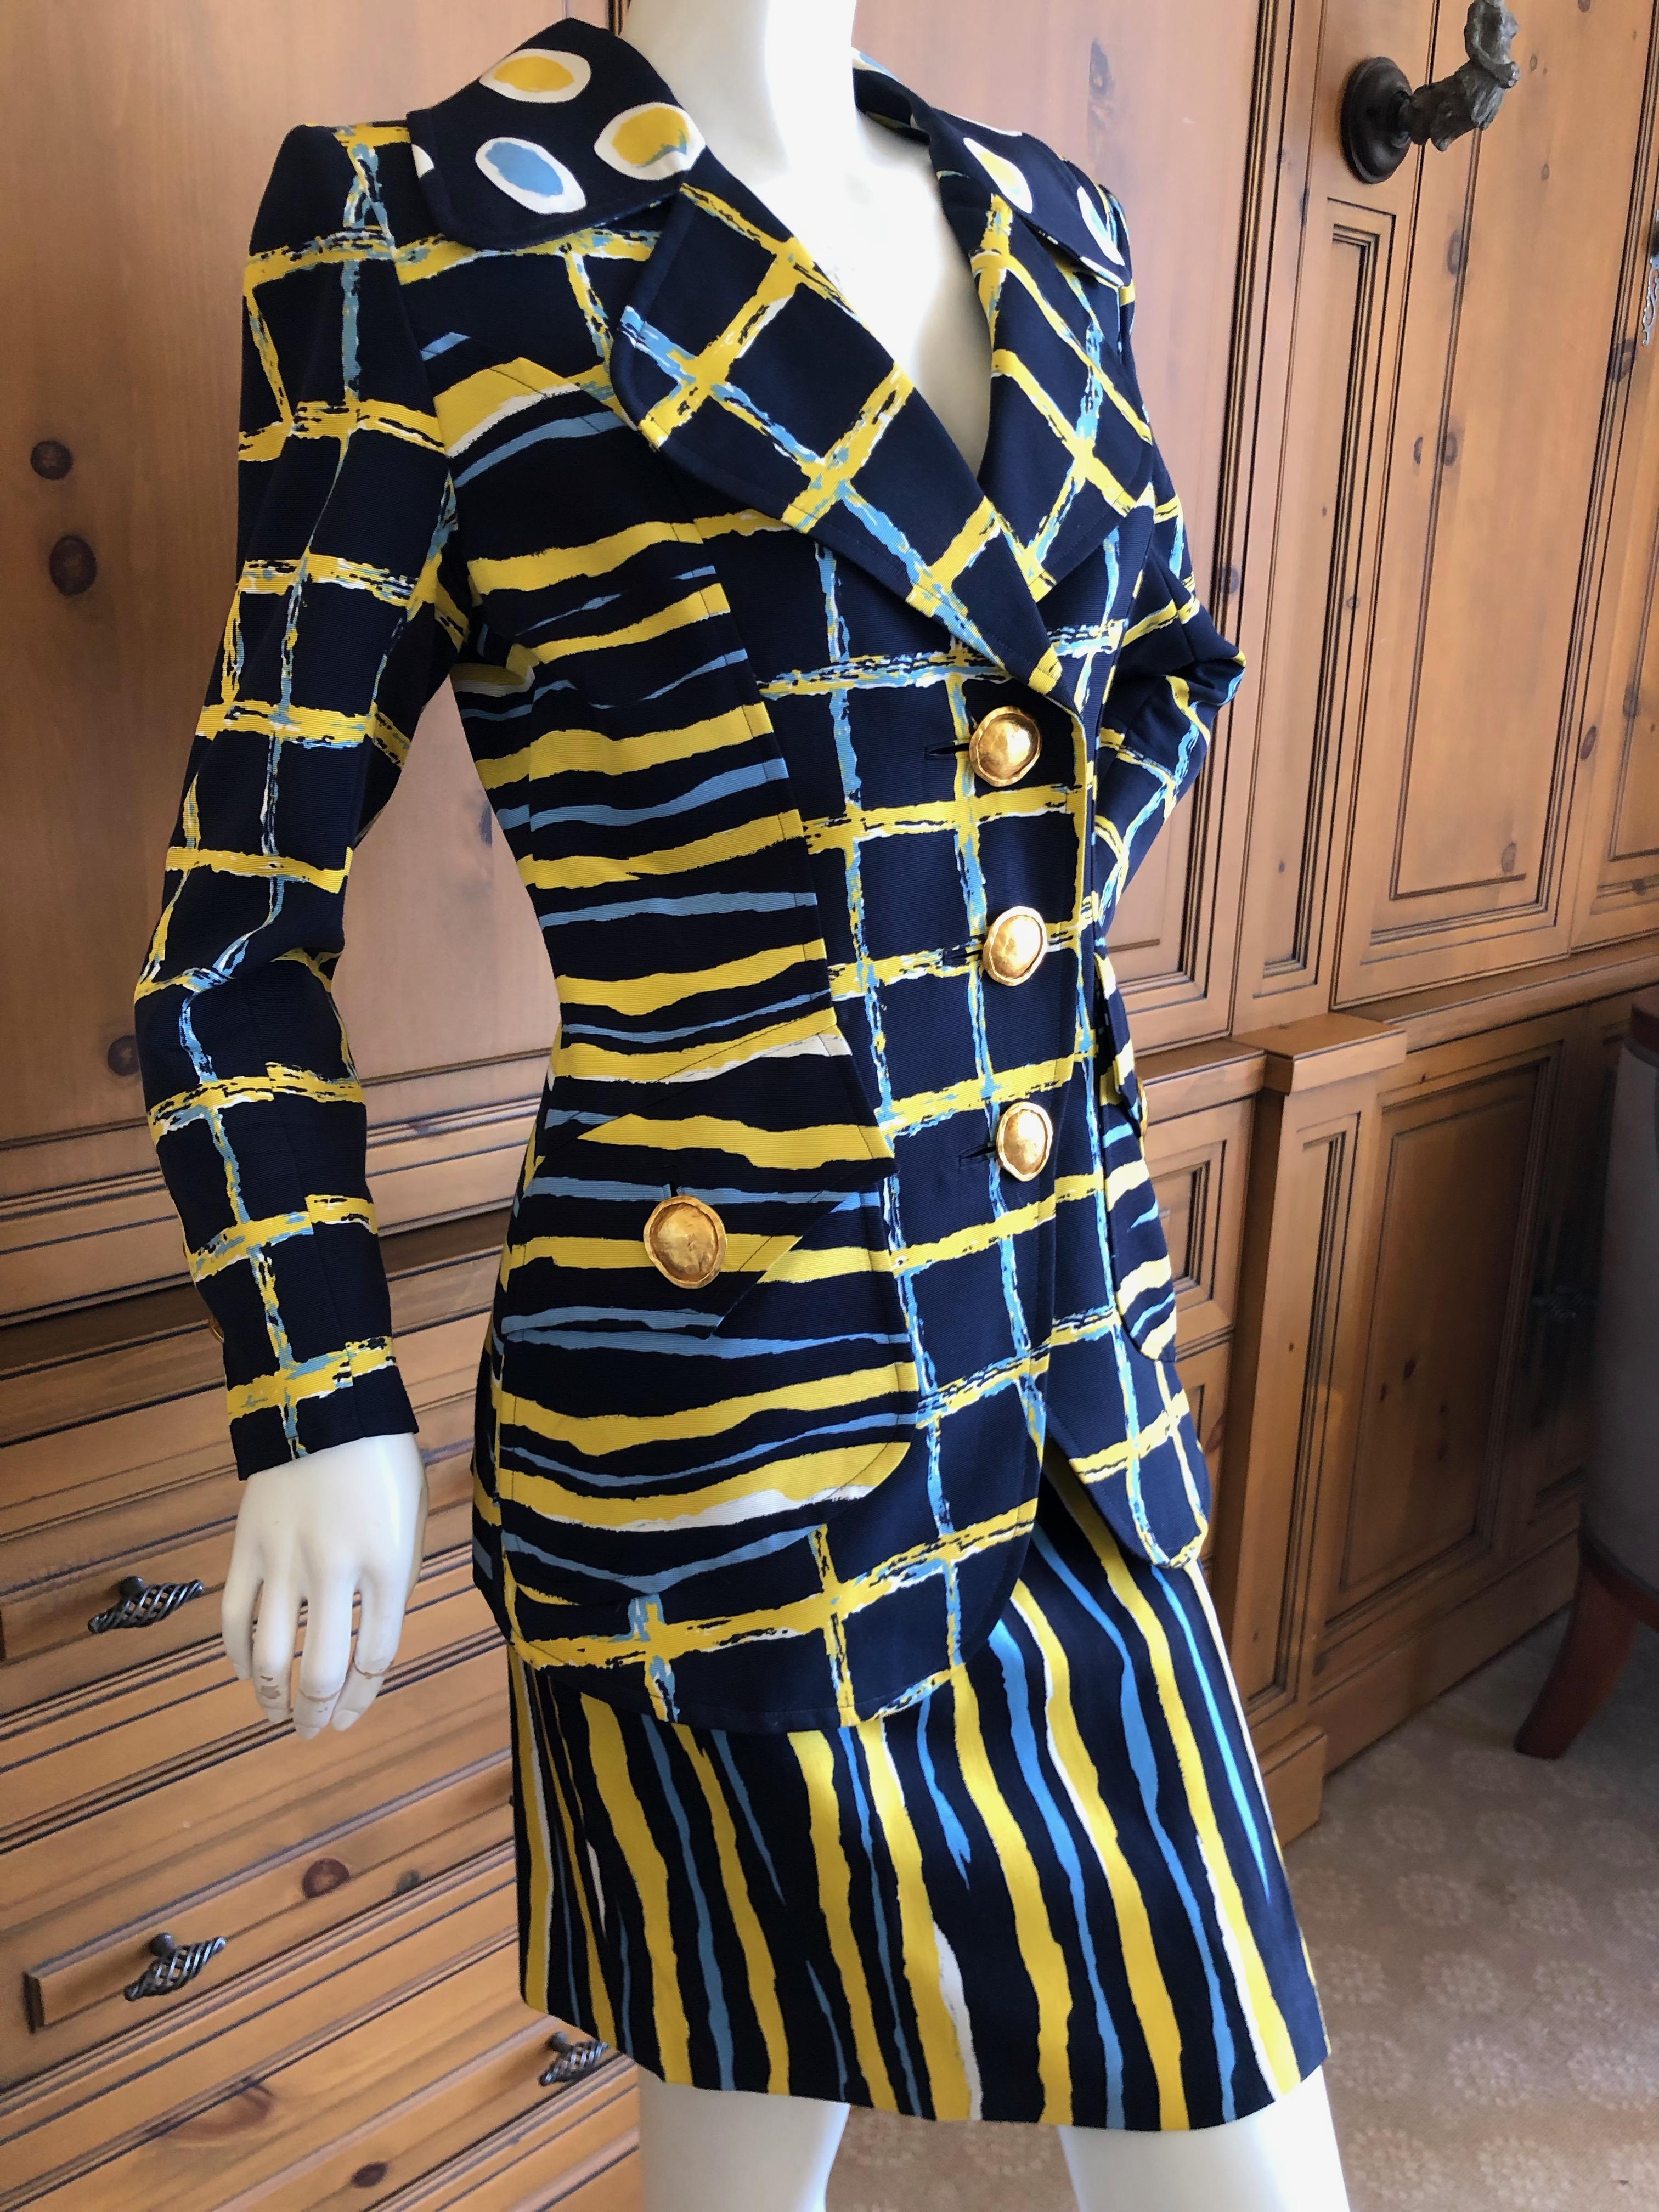 Christian Lacroix Vintage Colorful Pattern Skirt Suit with Bold Gold Buttons In Excellent Condition For Sale In Cloverdale, CA